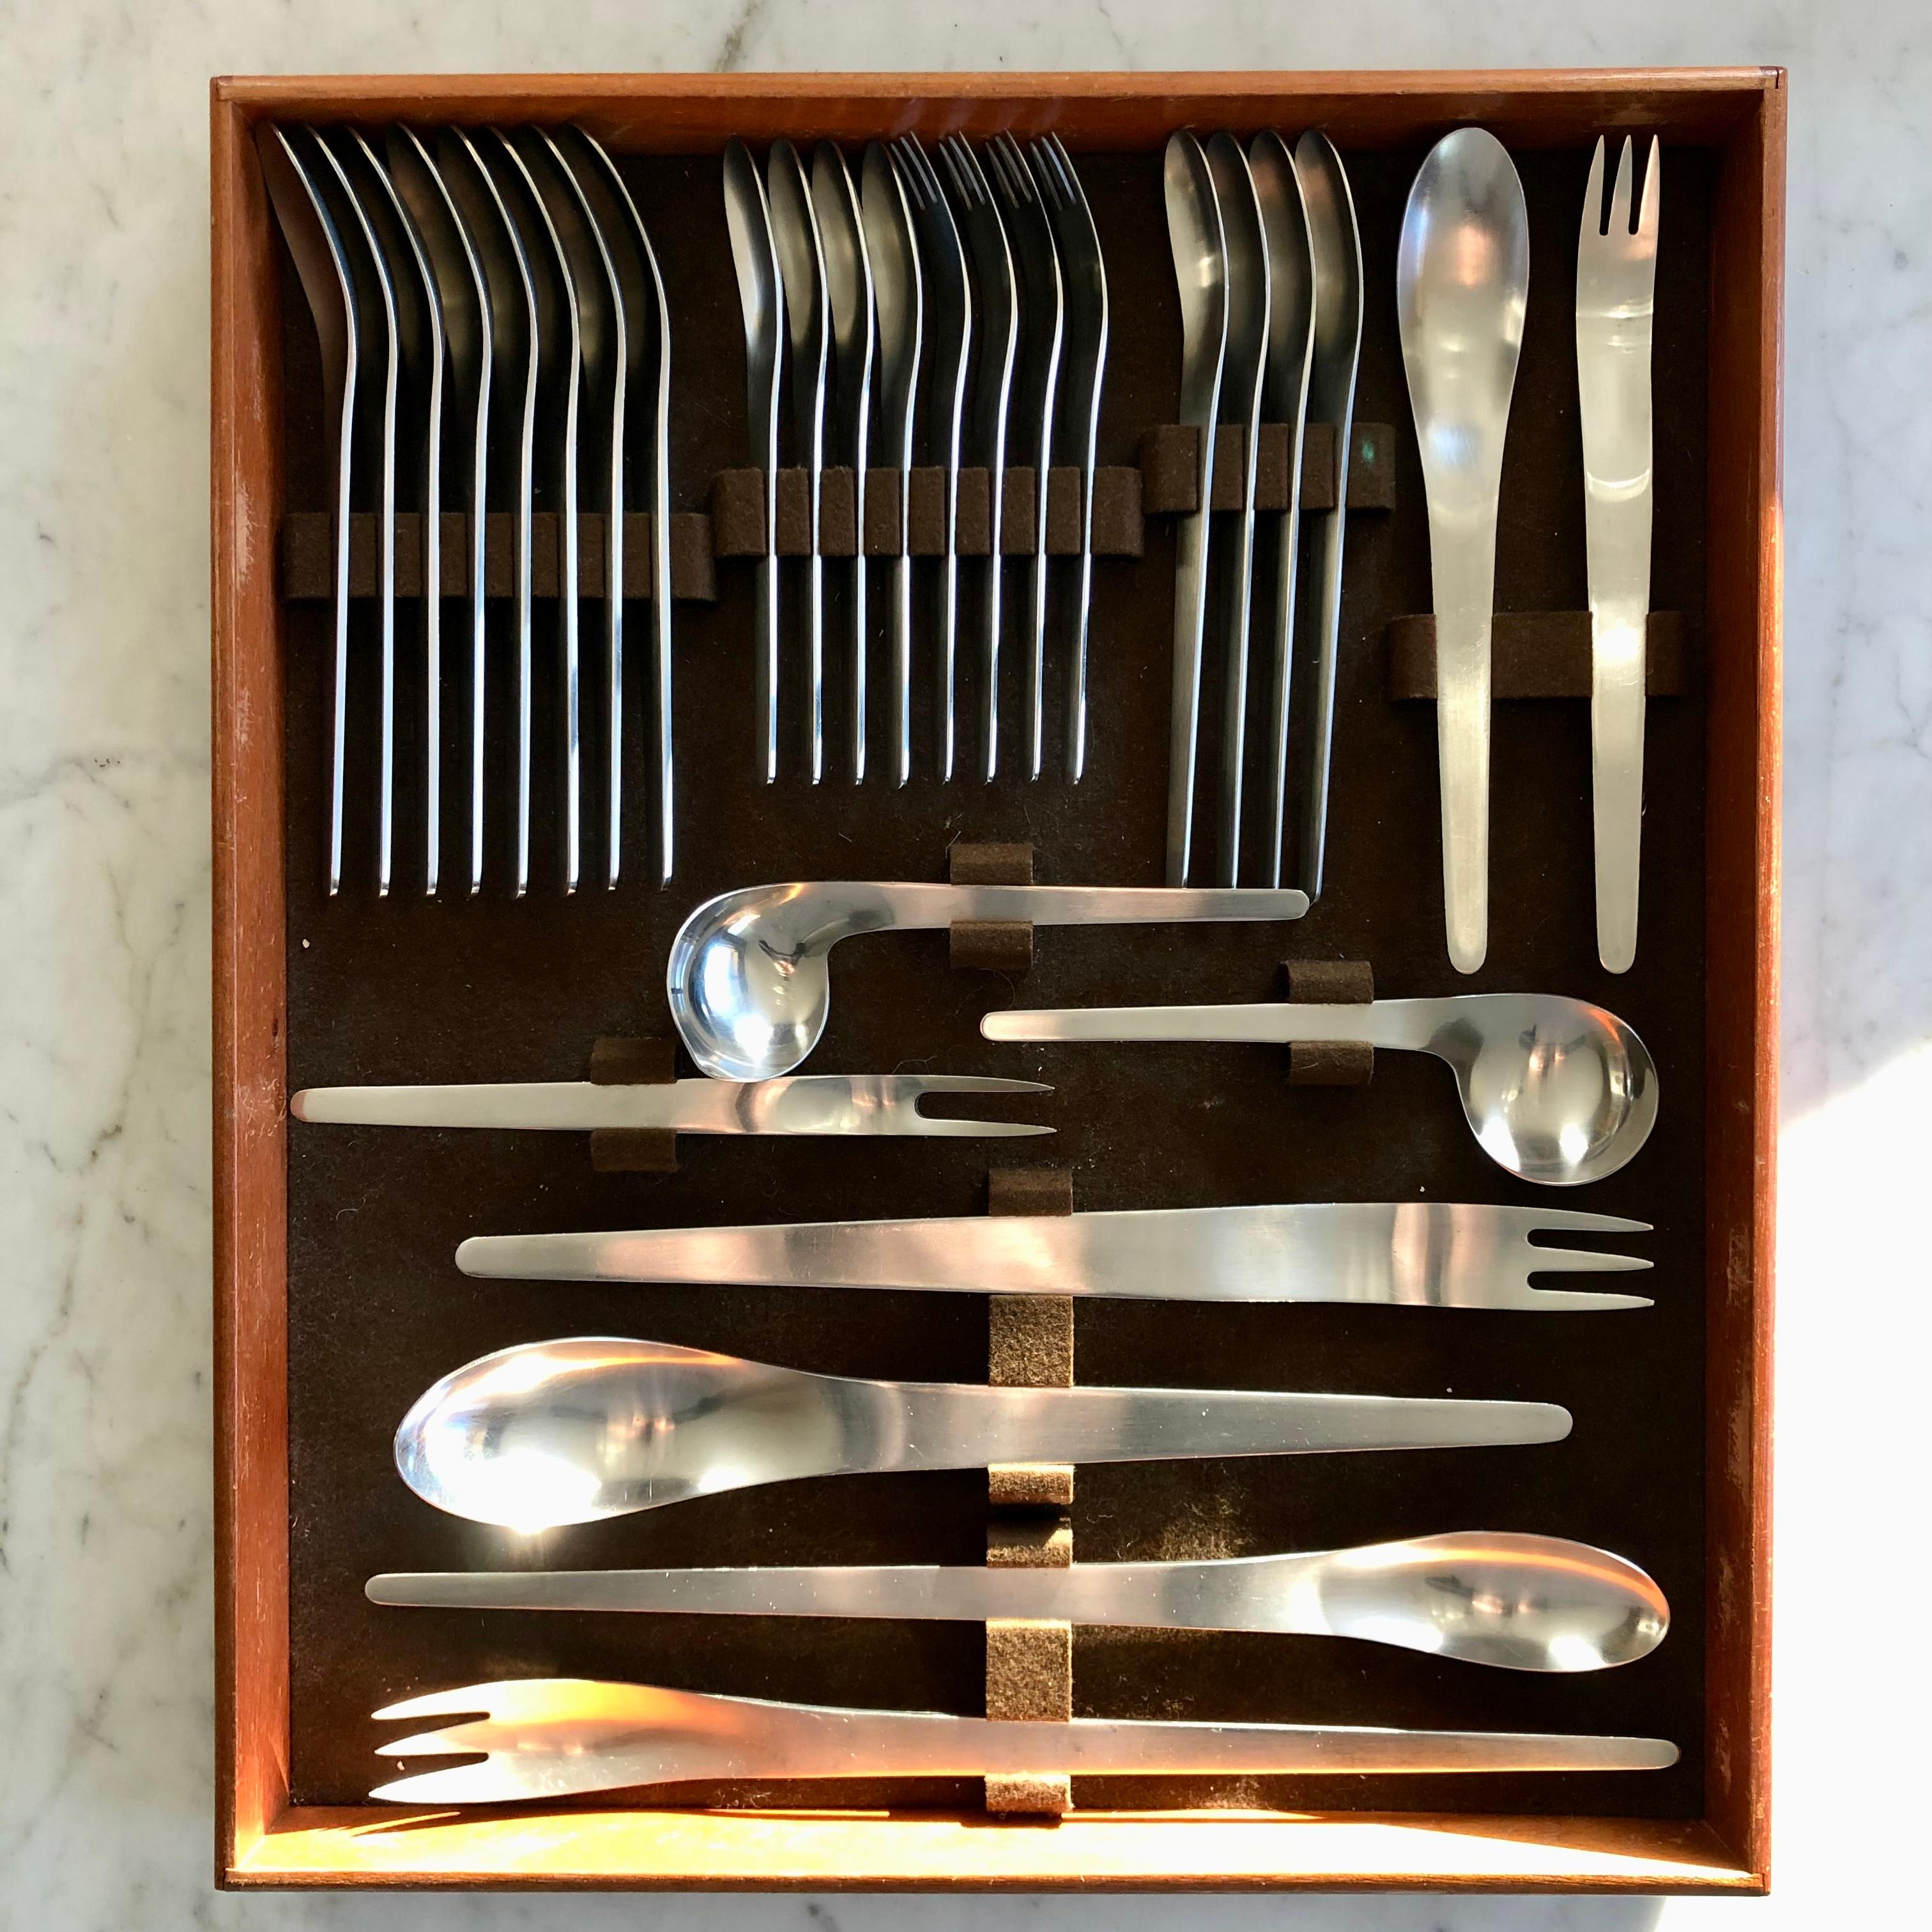 Flatware made by A J Michelsen and designed by Arne Jacobsen for the royal sas hotel of Copenhagen in 1957.
The set is in 2 original wood drawers.
It’s an early version made by Michelsen (not Jensen).
Suite of 8 pieces and service pieces.
In